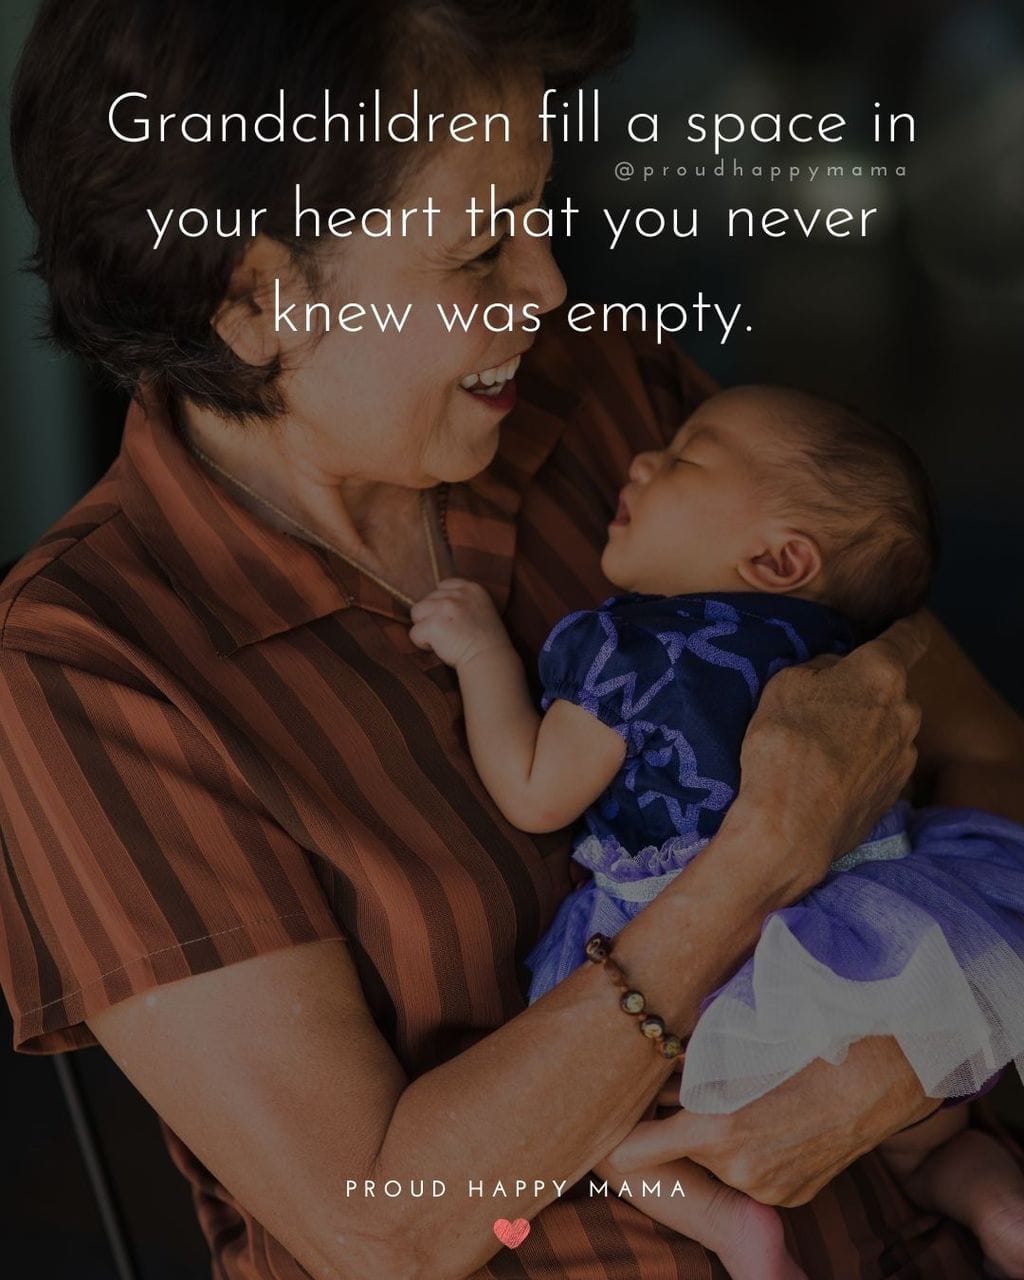 Quotes for Grandchildren - Grandchildren fill a space in your heart that you never knew was empty.